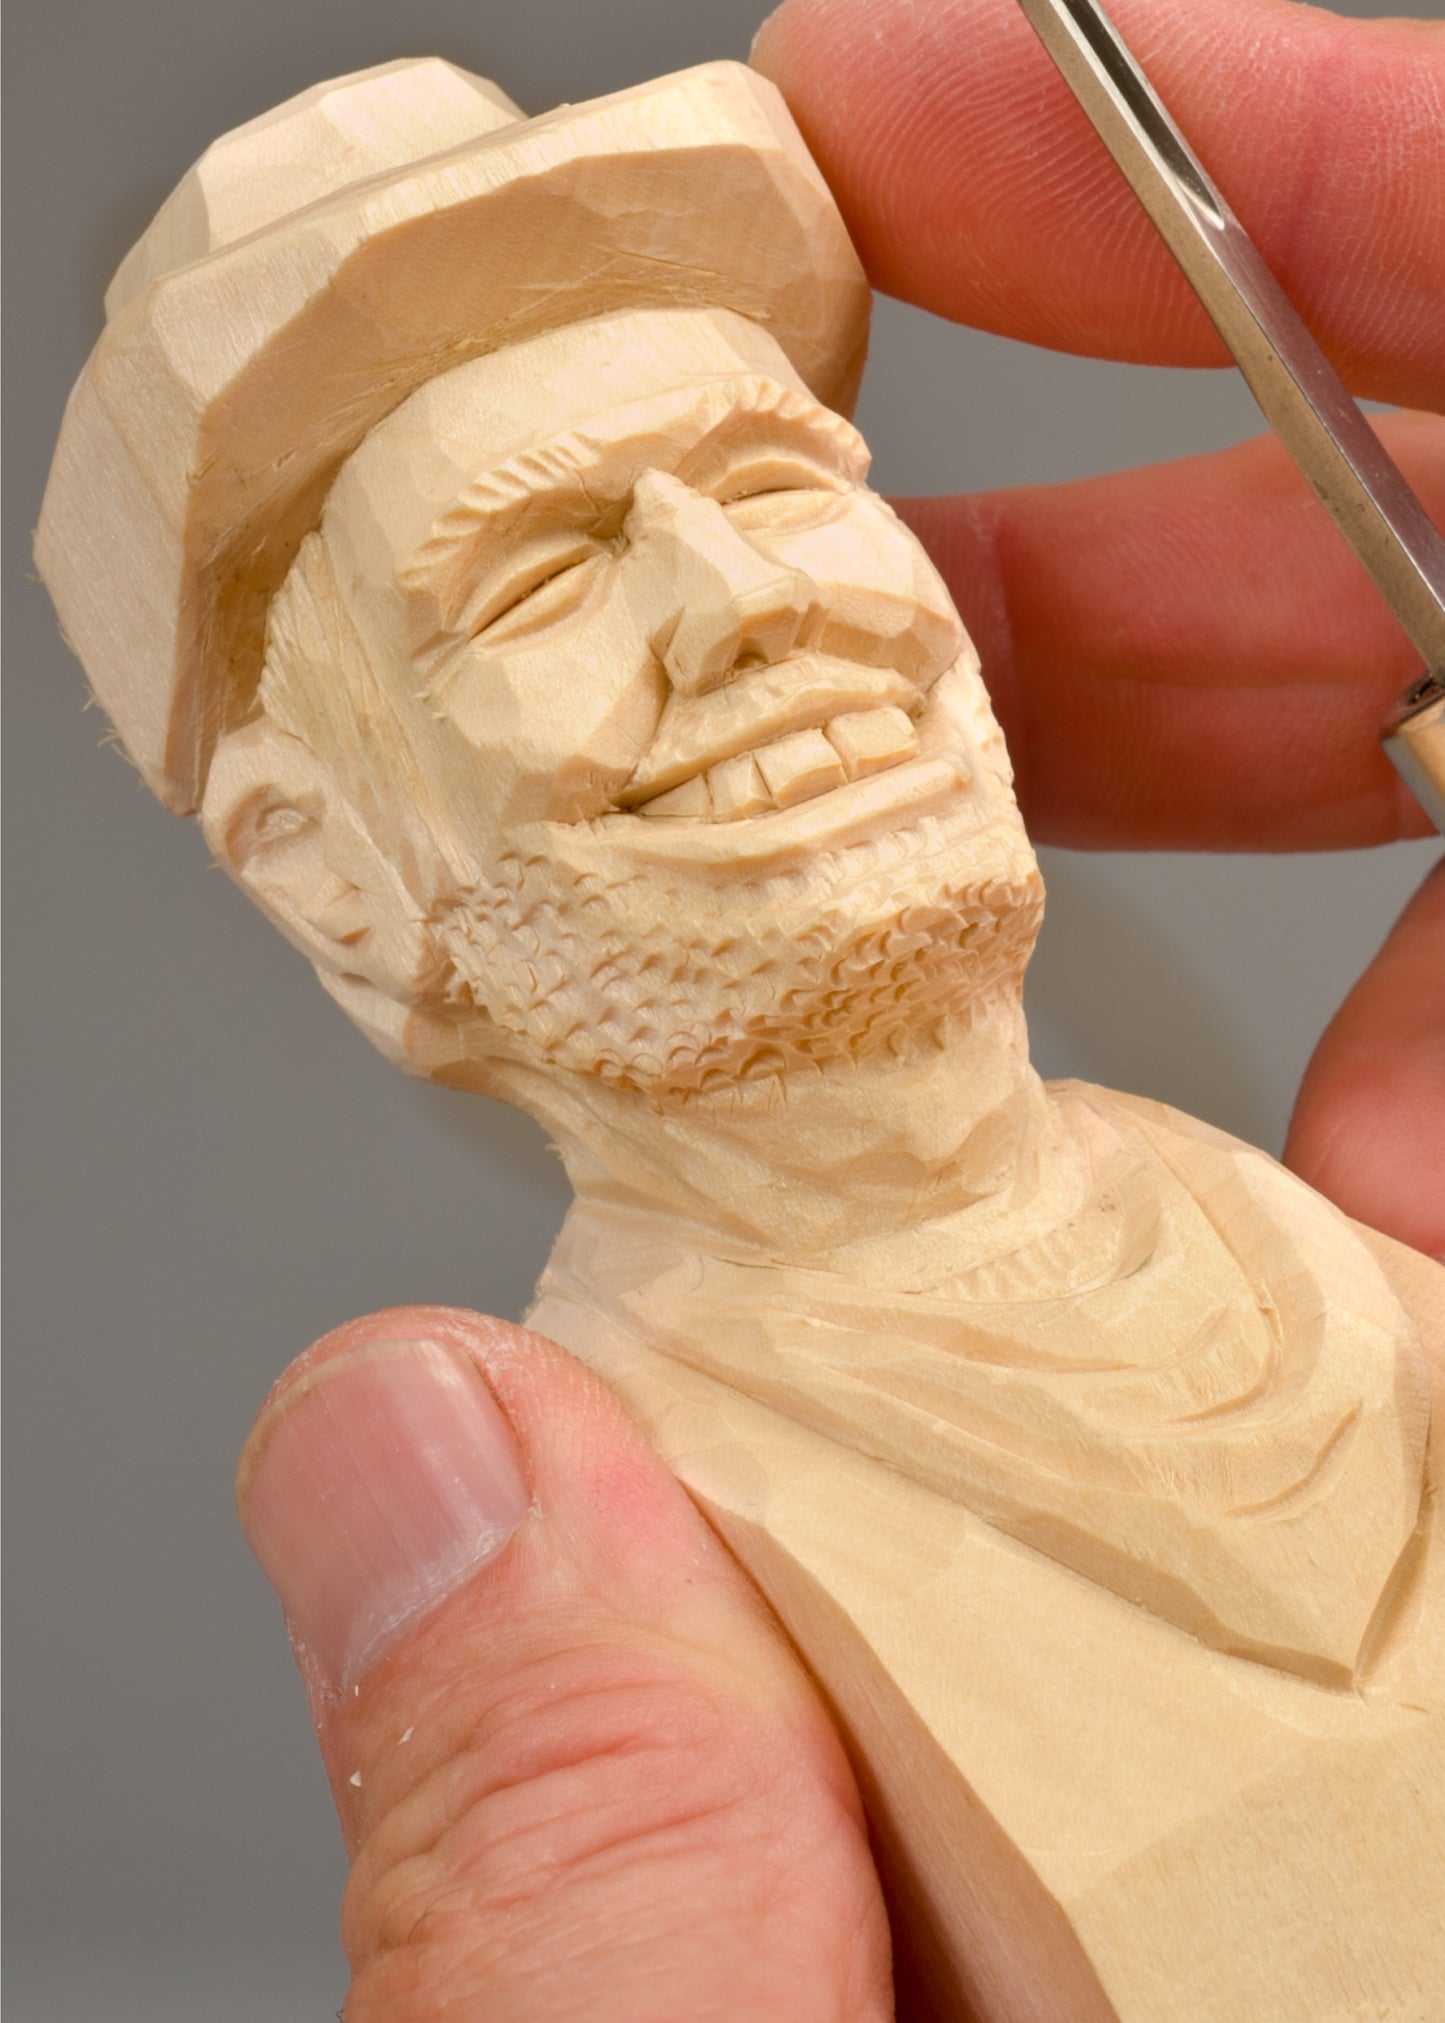 Cowboy Study Stick Kit (Learn to Carve Faces with Harold Enlow)